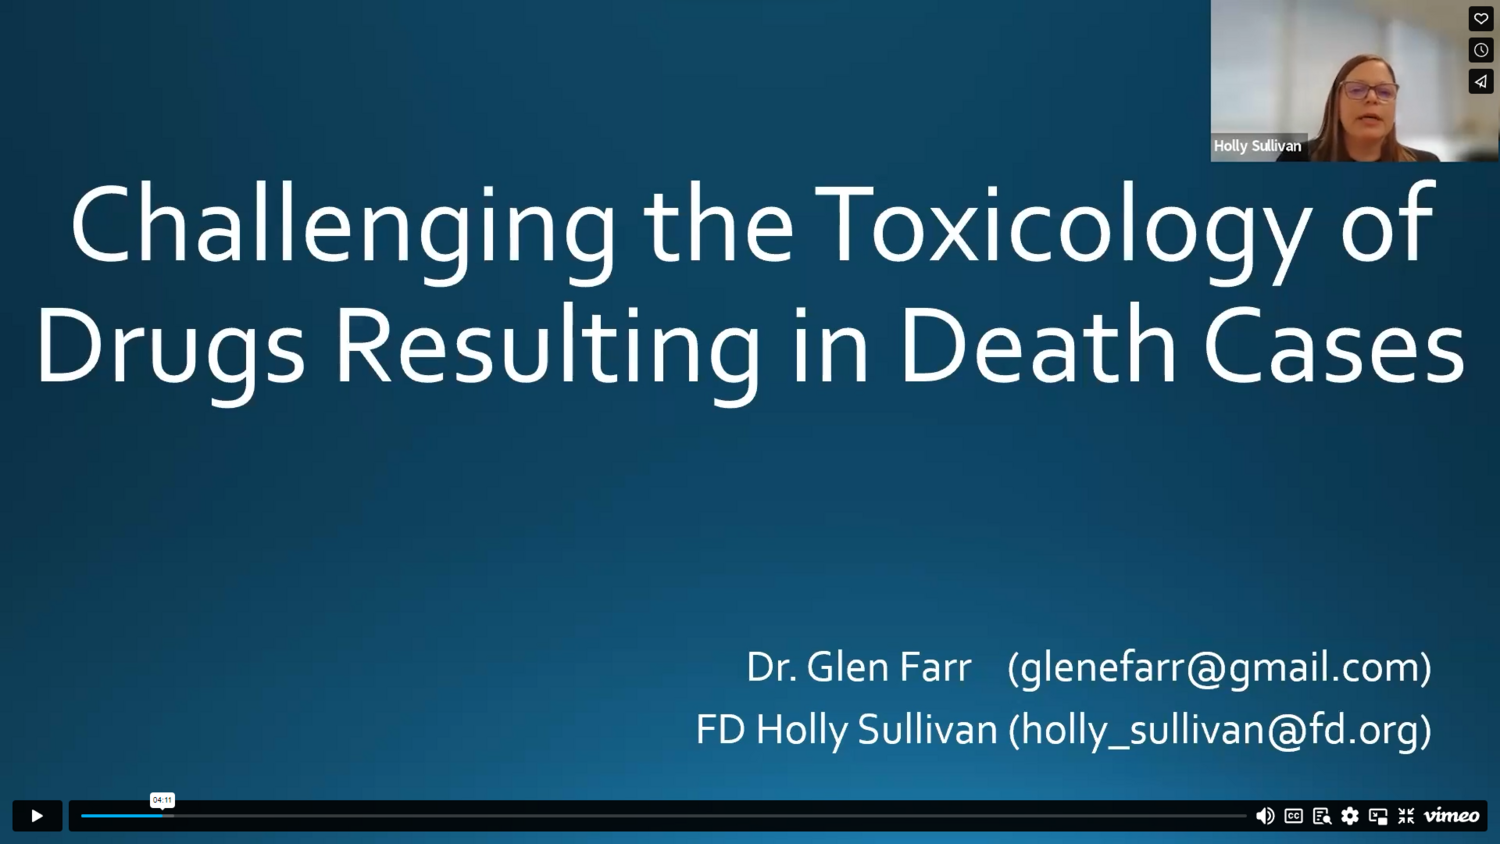 Challenging the Toxicology of Drugs in Death Cases